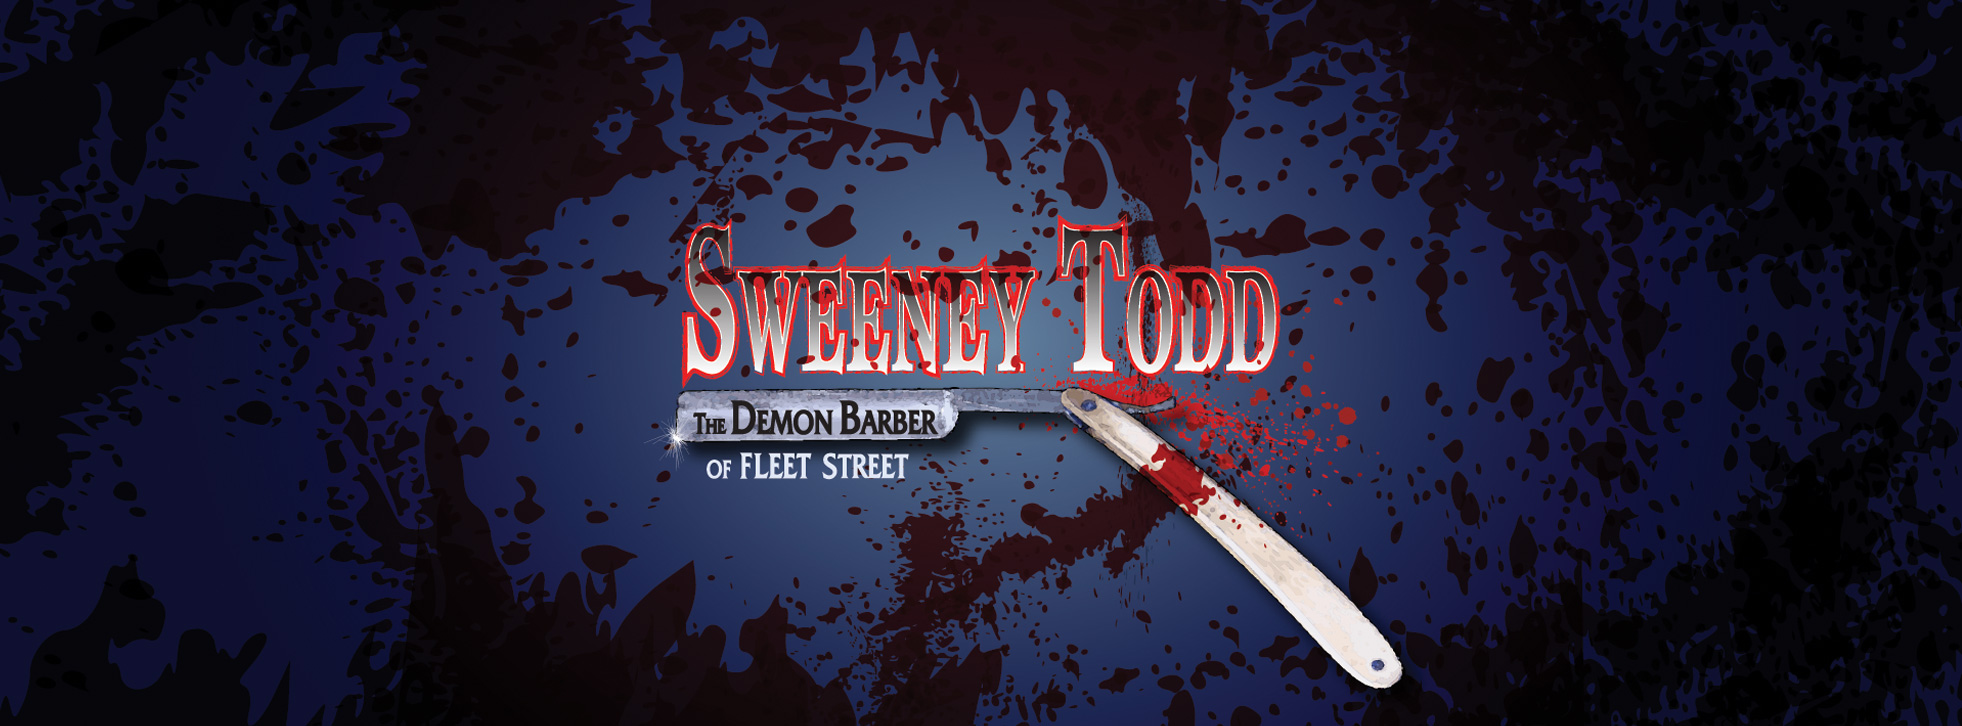 Sweeney Todd: A Musical Thriller in Concert